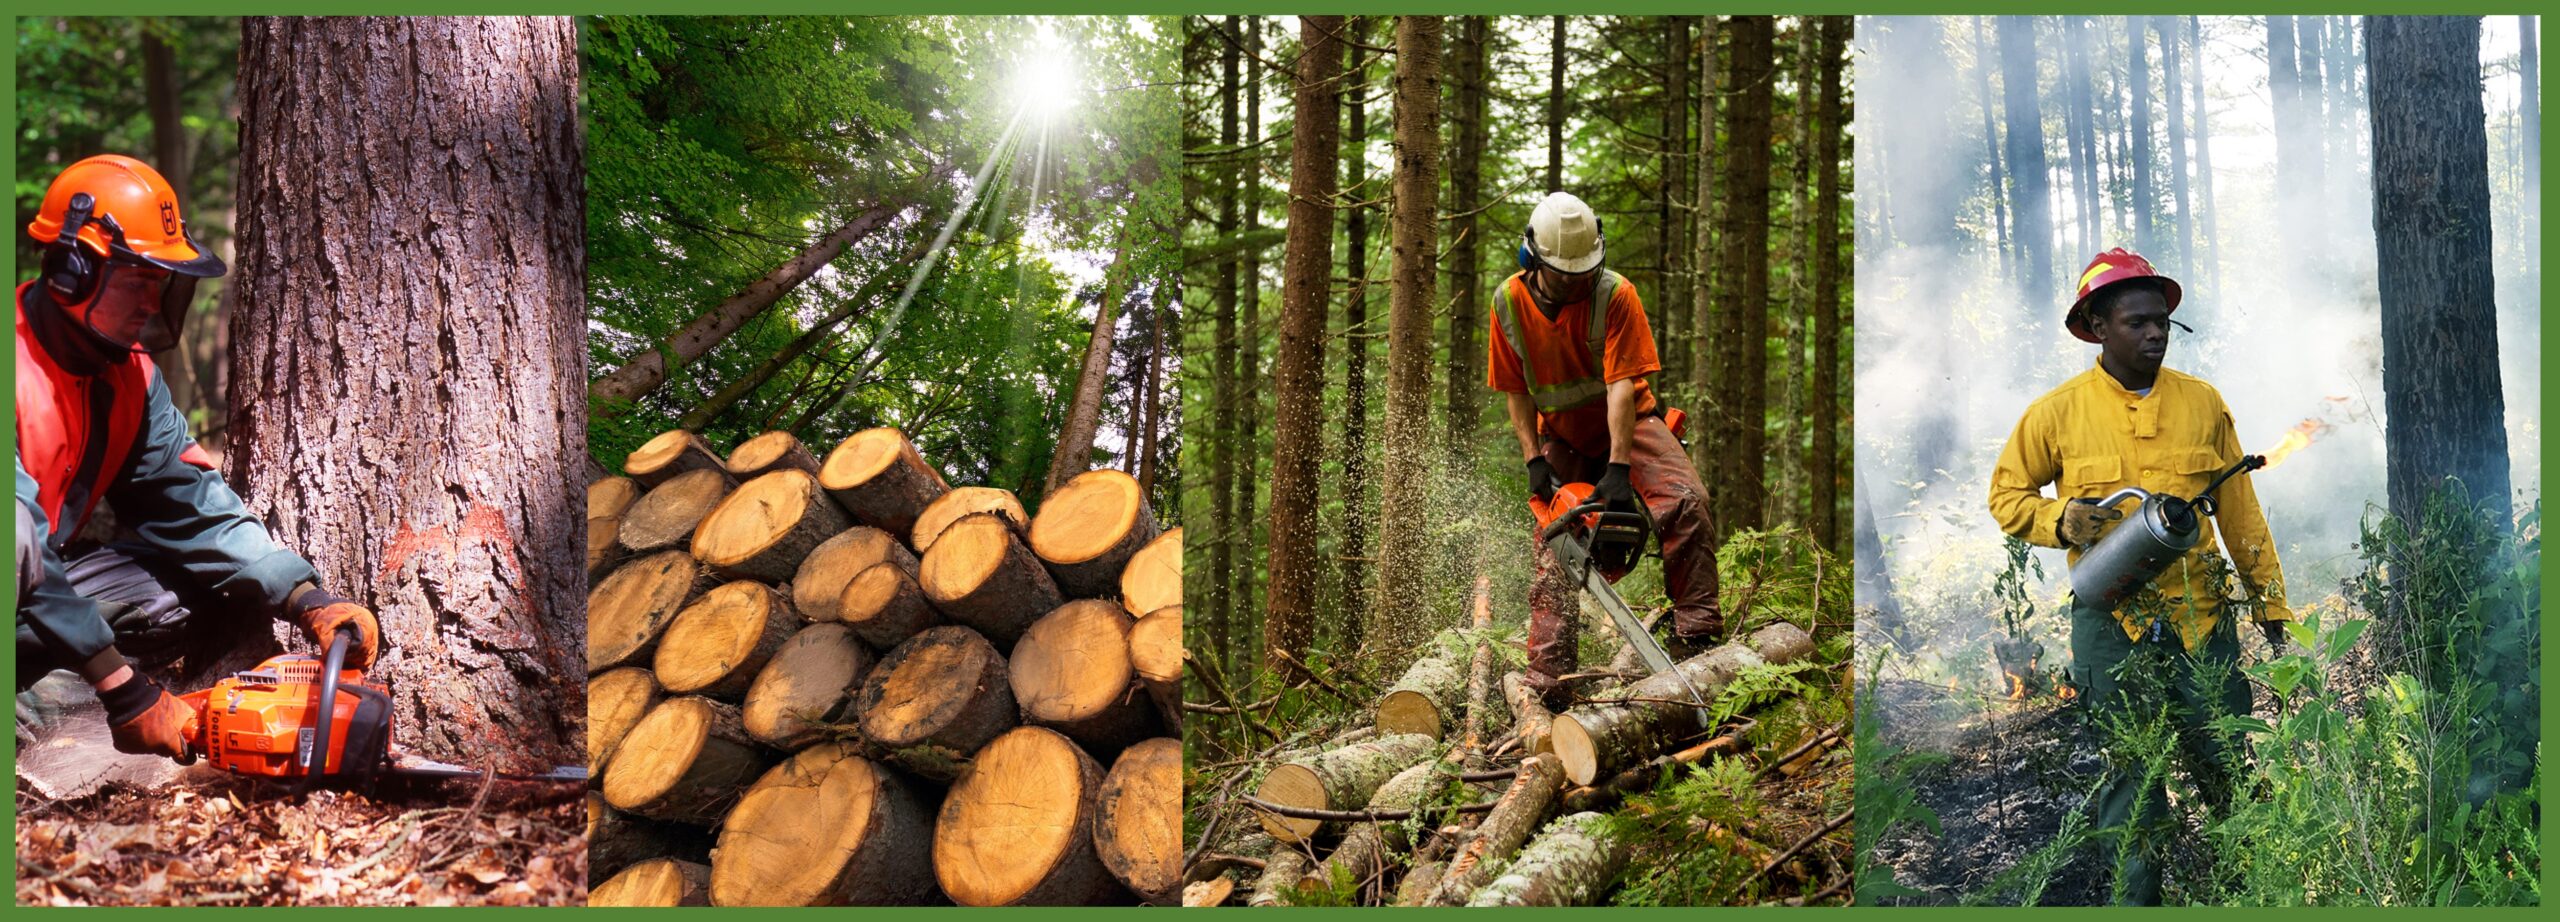 You are currently viewing Retrospective Risk Assessment of Injuries and Fatalities in the Forestry and Logging Workforce in the United States, 2003-2019